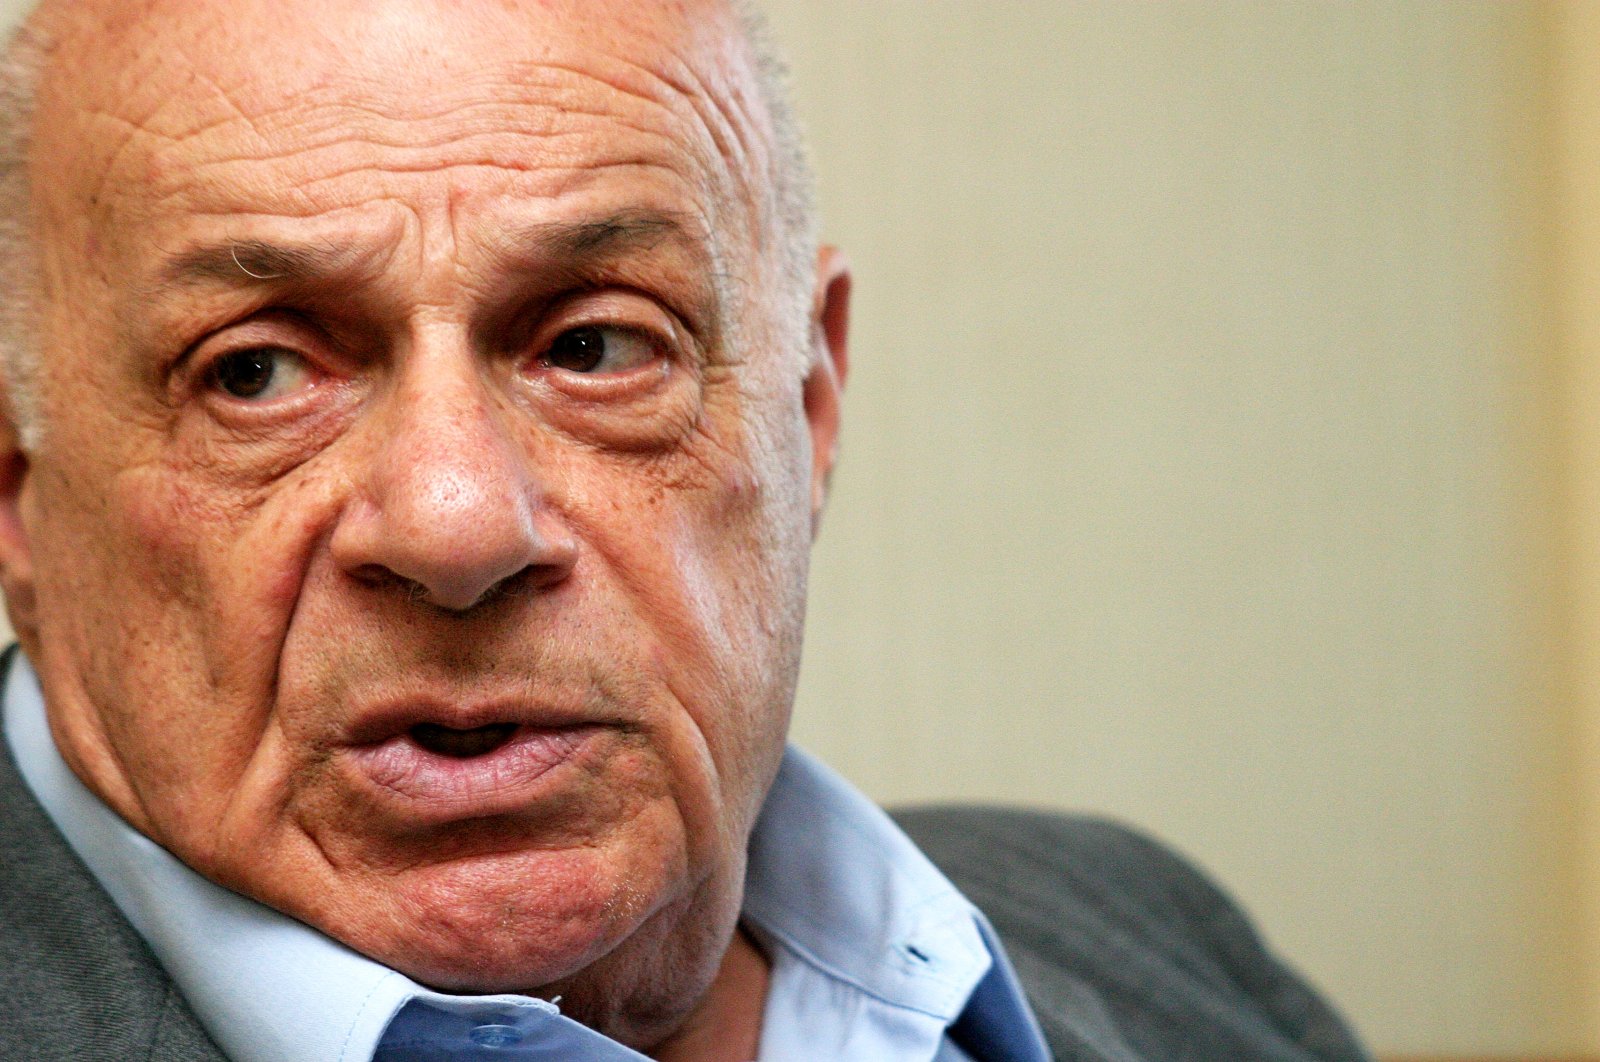 Turkish Cypriot politician and founder of the Turkish Republic of Northern Cyprus (TRNC) Rauf Denktaş is pictured in Istanbul, Turkey, on May 26, 2006. (Shutterstock Photo)